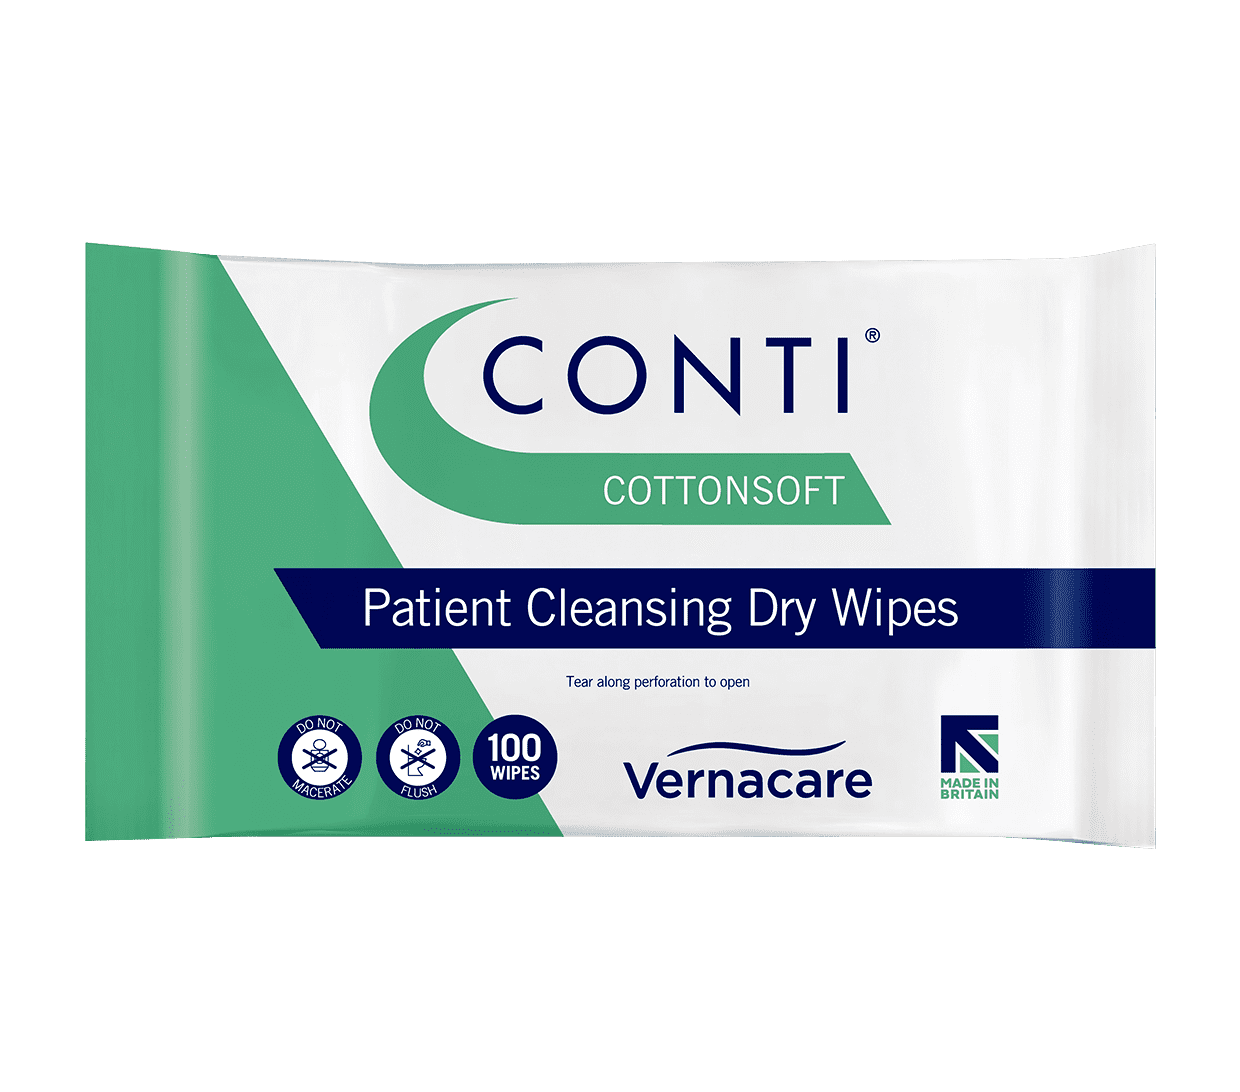 Dry wipes made from cotton-enriched material provide strength and softness. The heavy-weight wipe is ideal for effective cleansing of heavily soiled skin and gentle enough to be used for continence care.